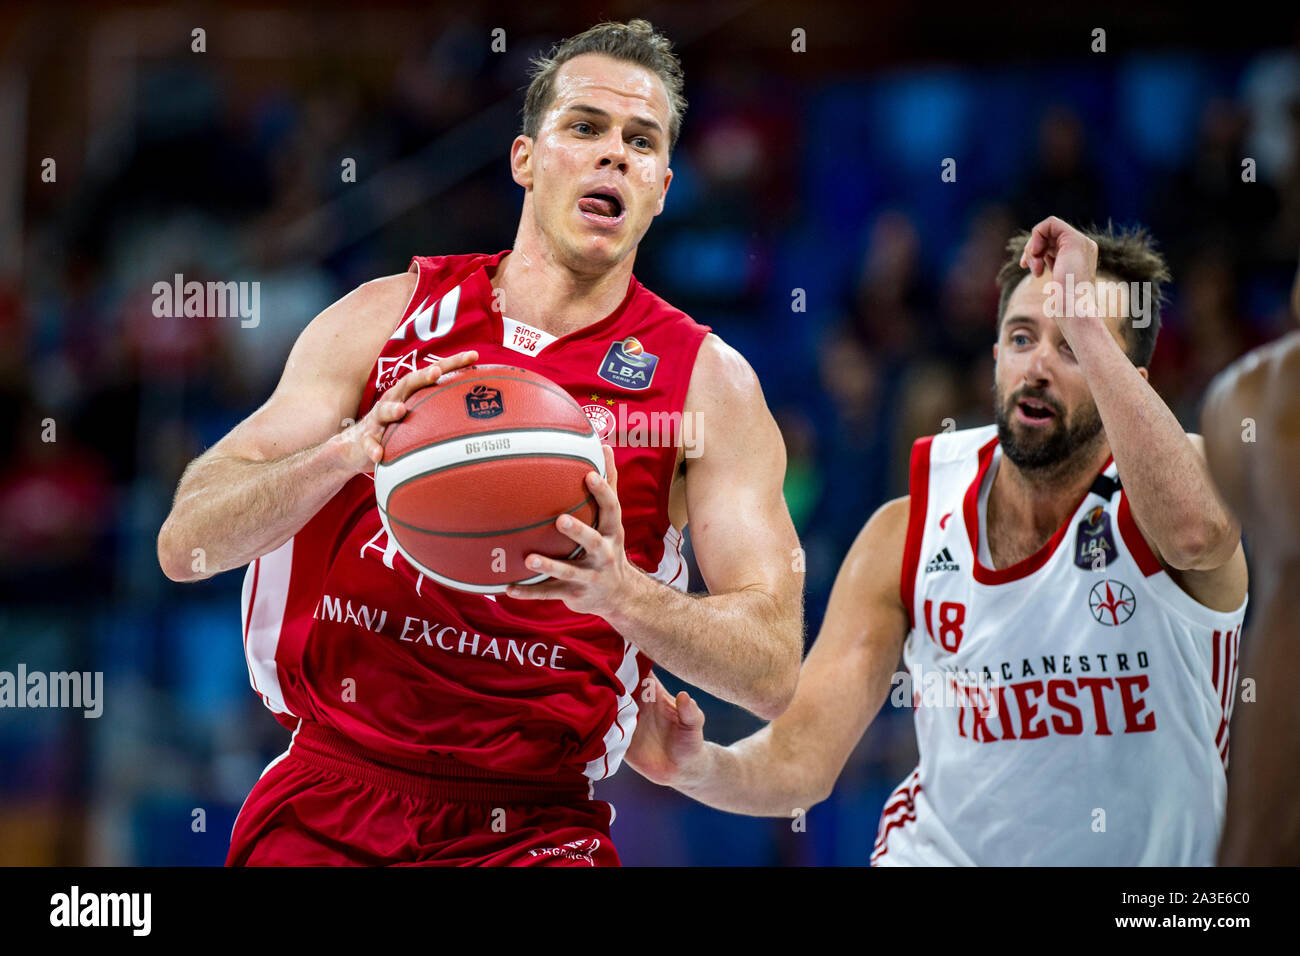 Michael Roll (AX Armani Exchange Olimpia Milano) during Legabasket Serie A basketball match AX Armani Exchange Olimpia Milano vs Pallacanestro Trieste Stock Photo